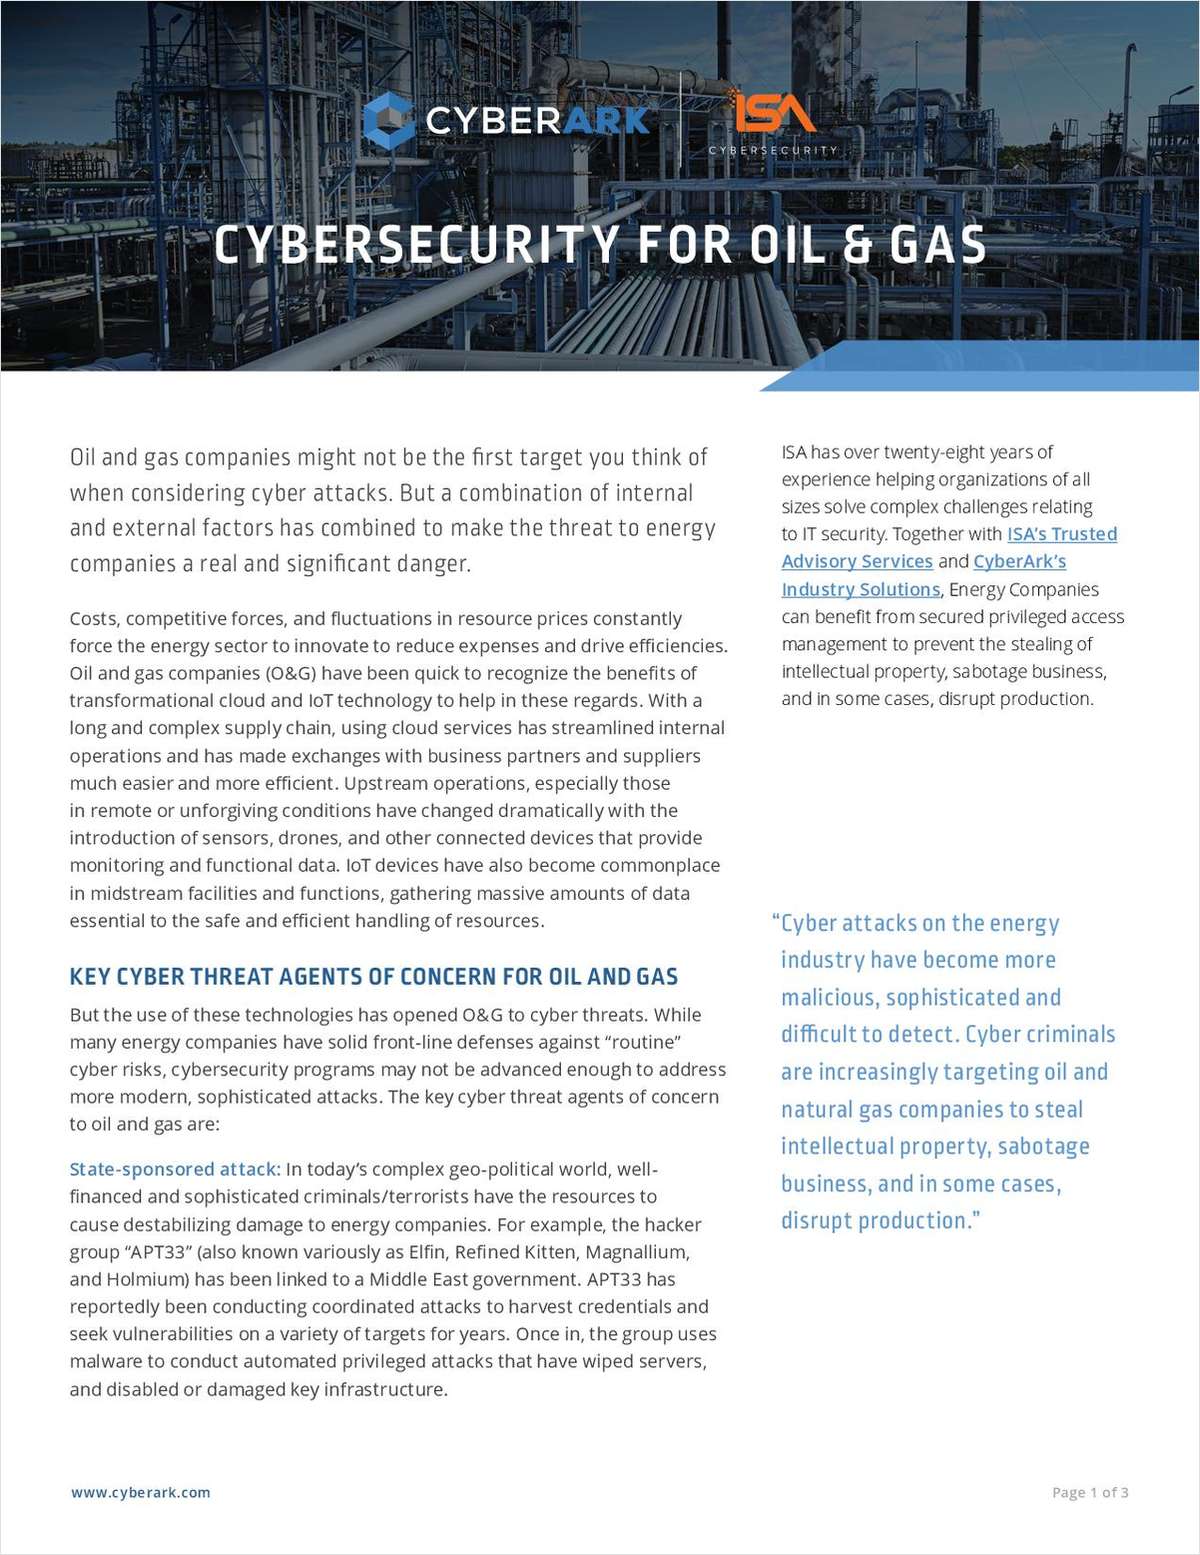 Cybersecurity for Oil & Gas